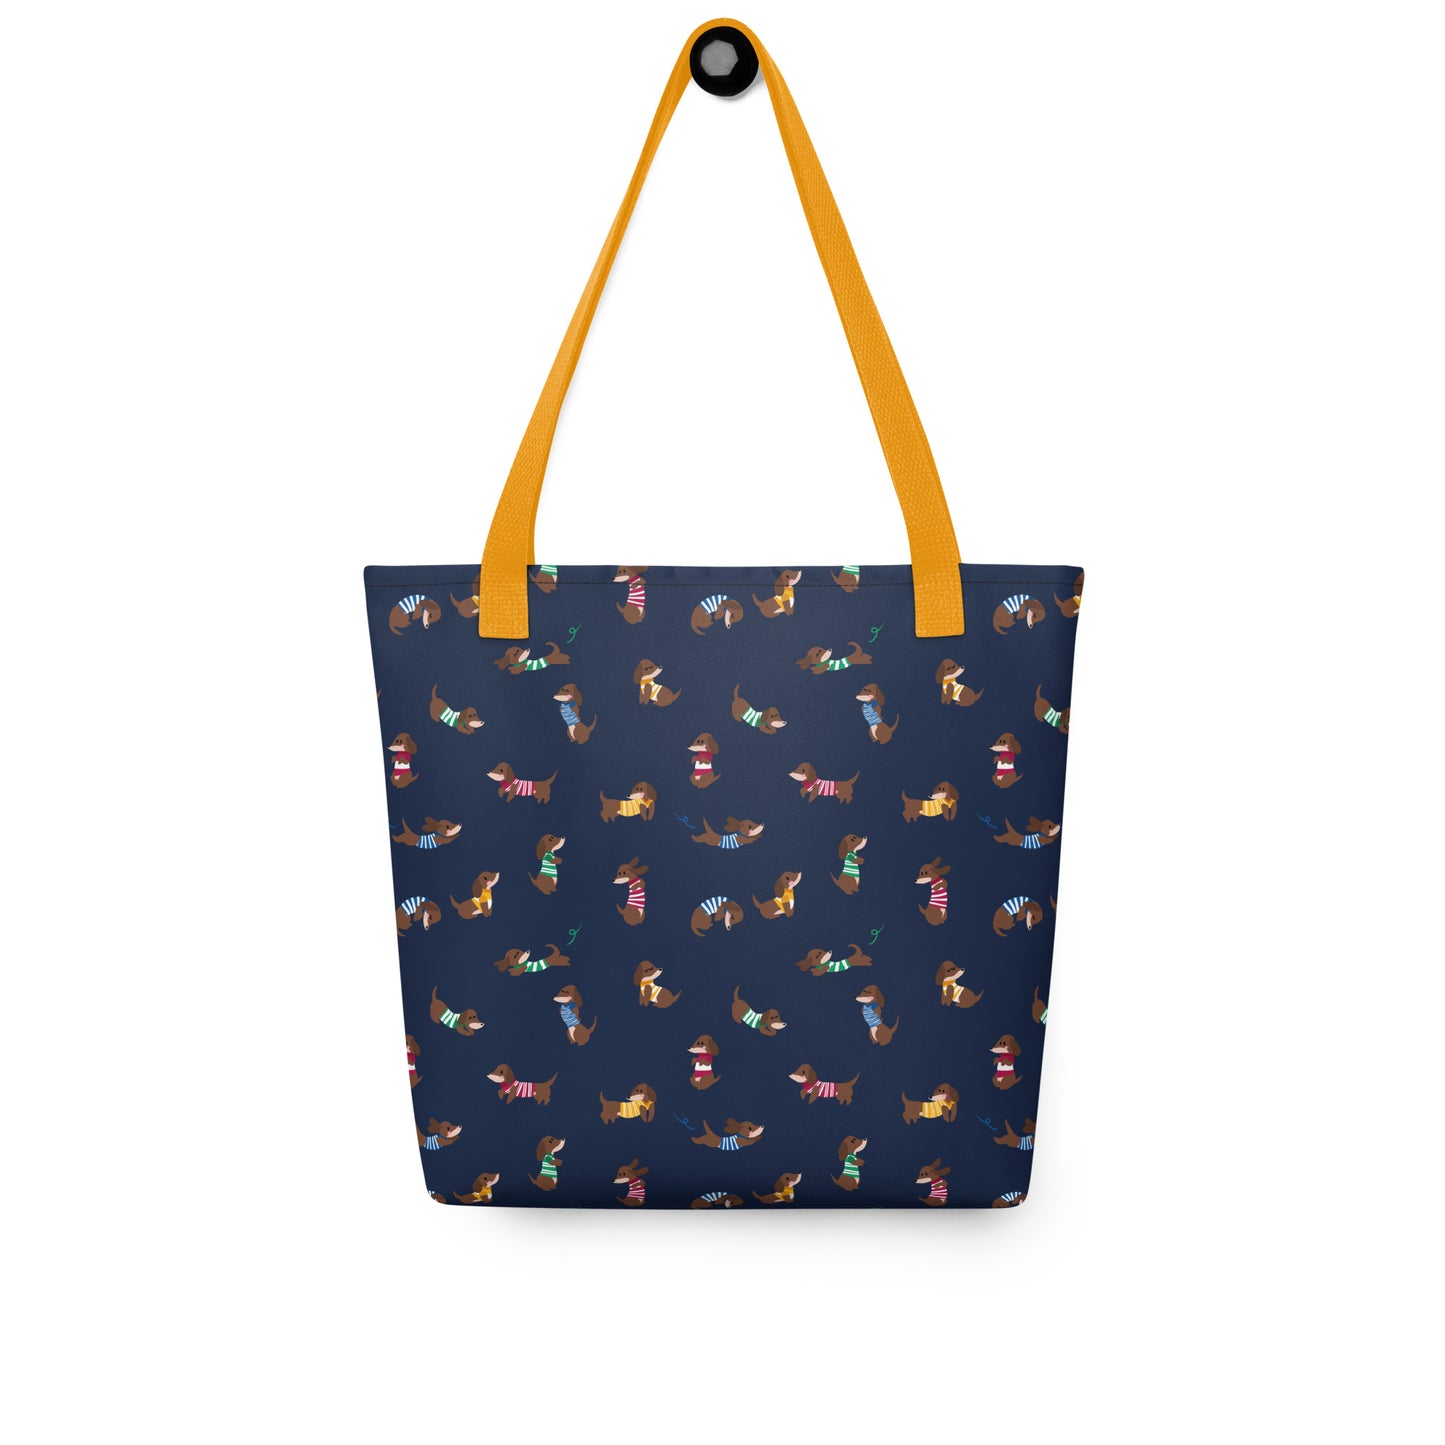 Dachshunds in Stripes Patterned Tote Bag